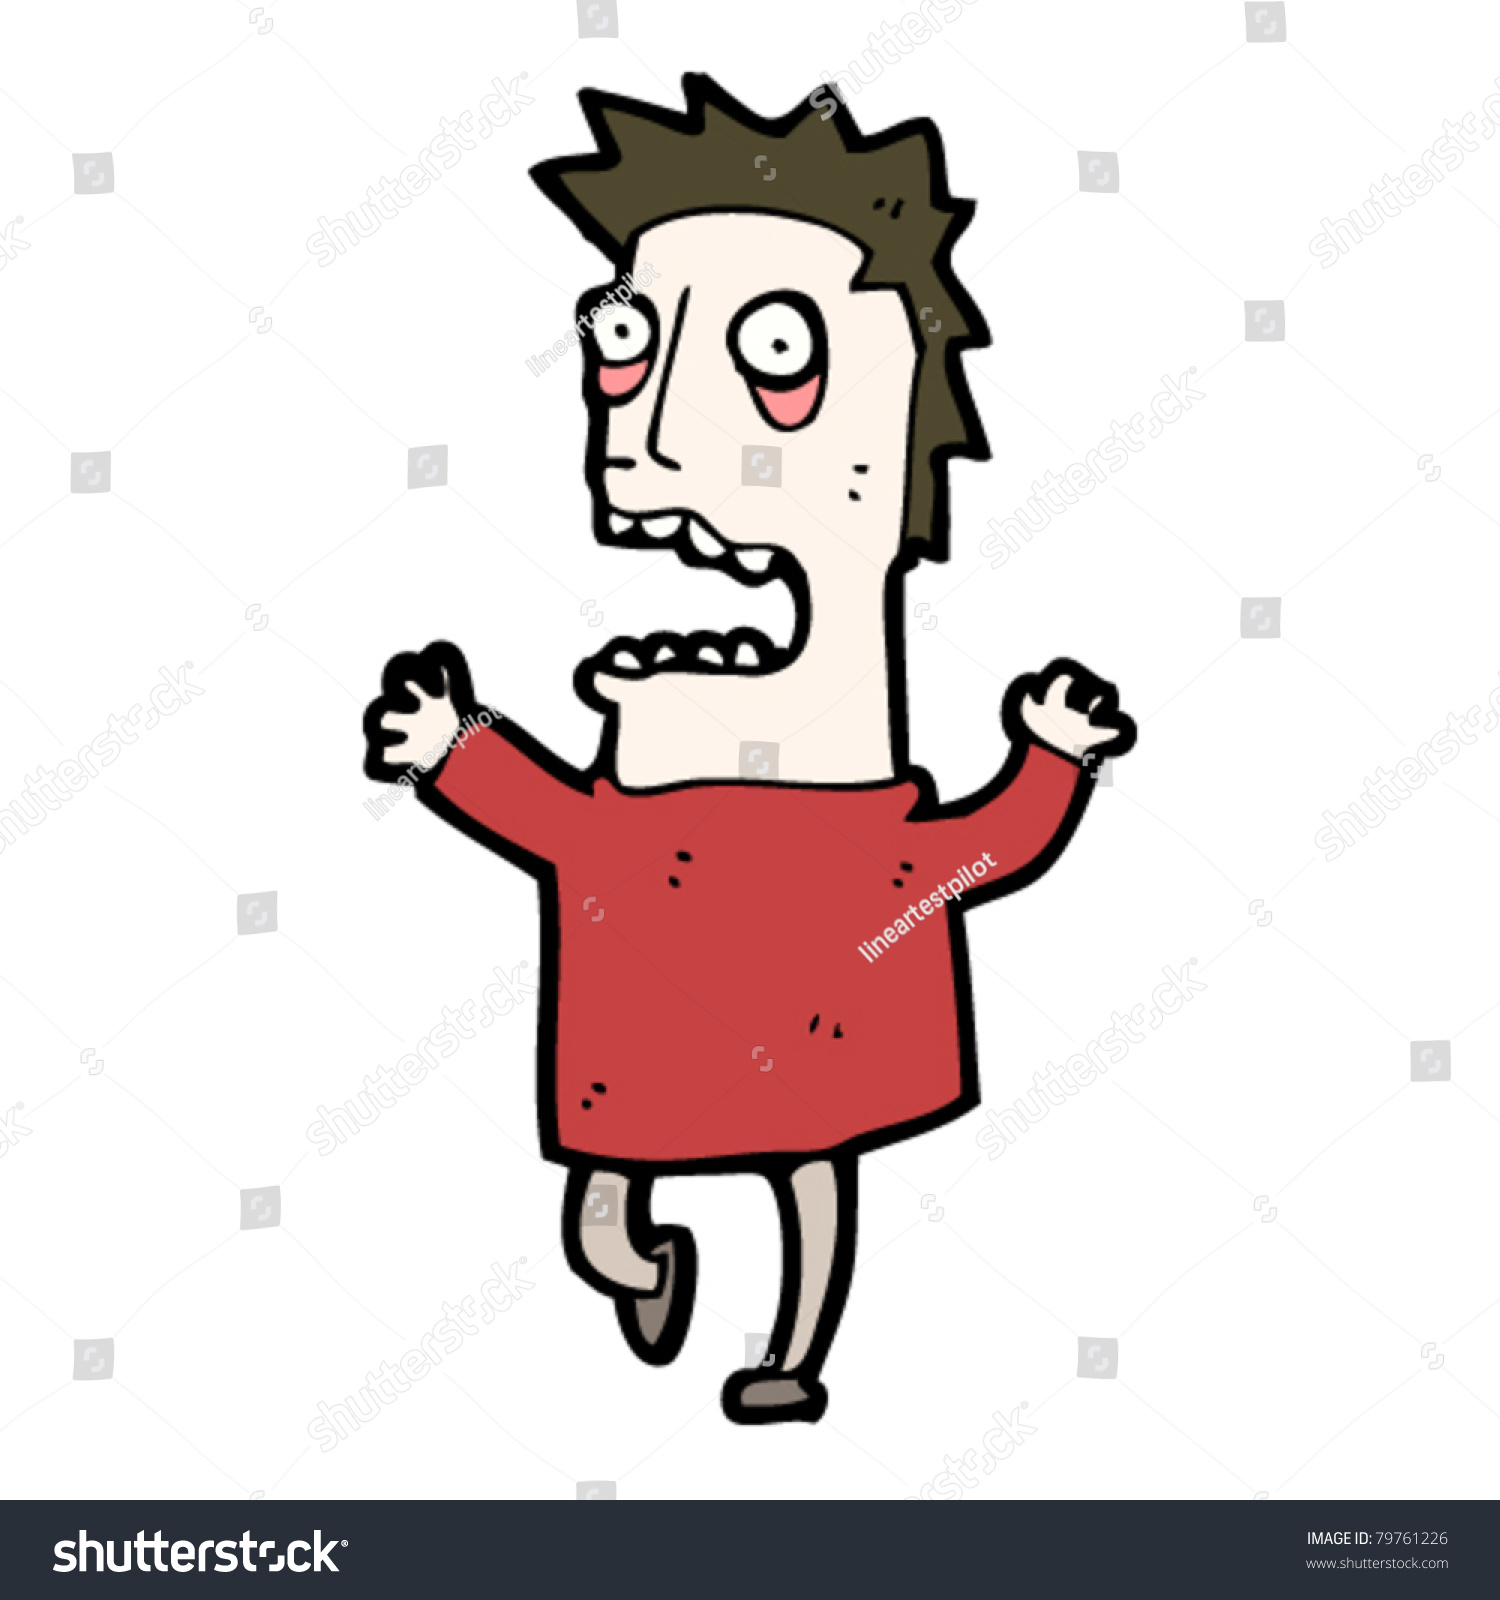 Stressed Out Cartoon Man Stock Vector 79761226 - Shutterstock